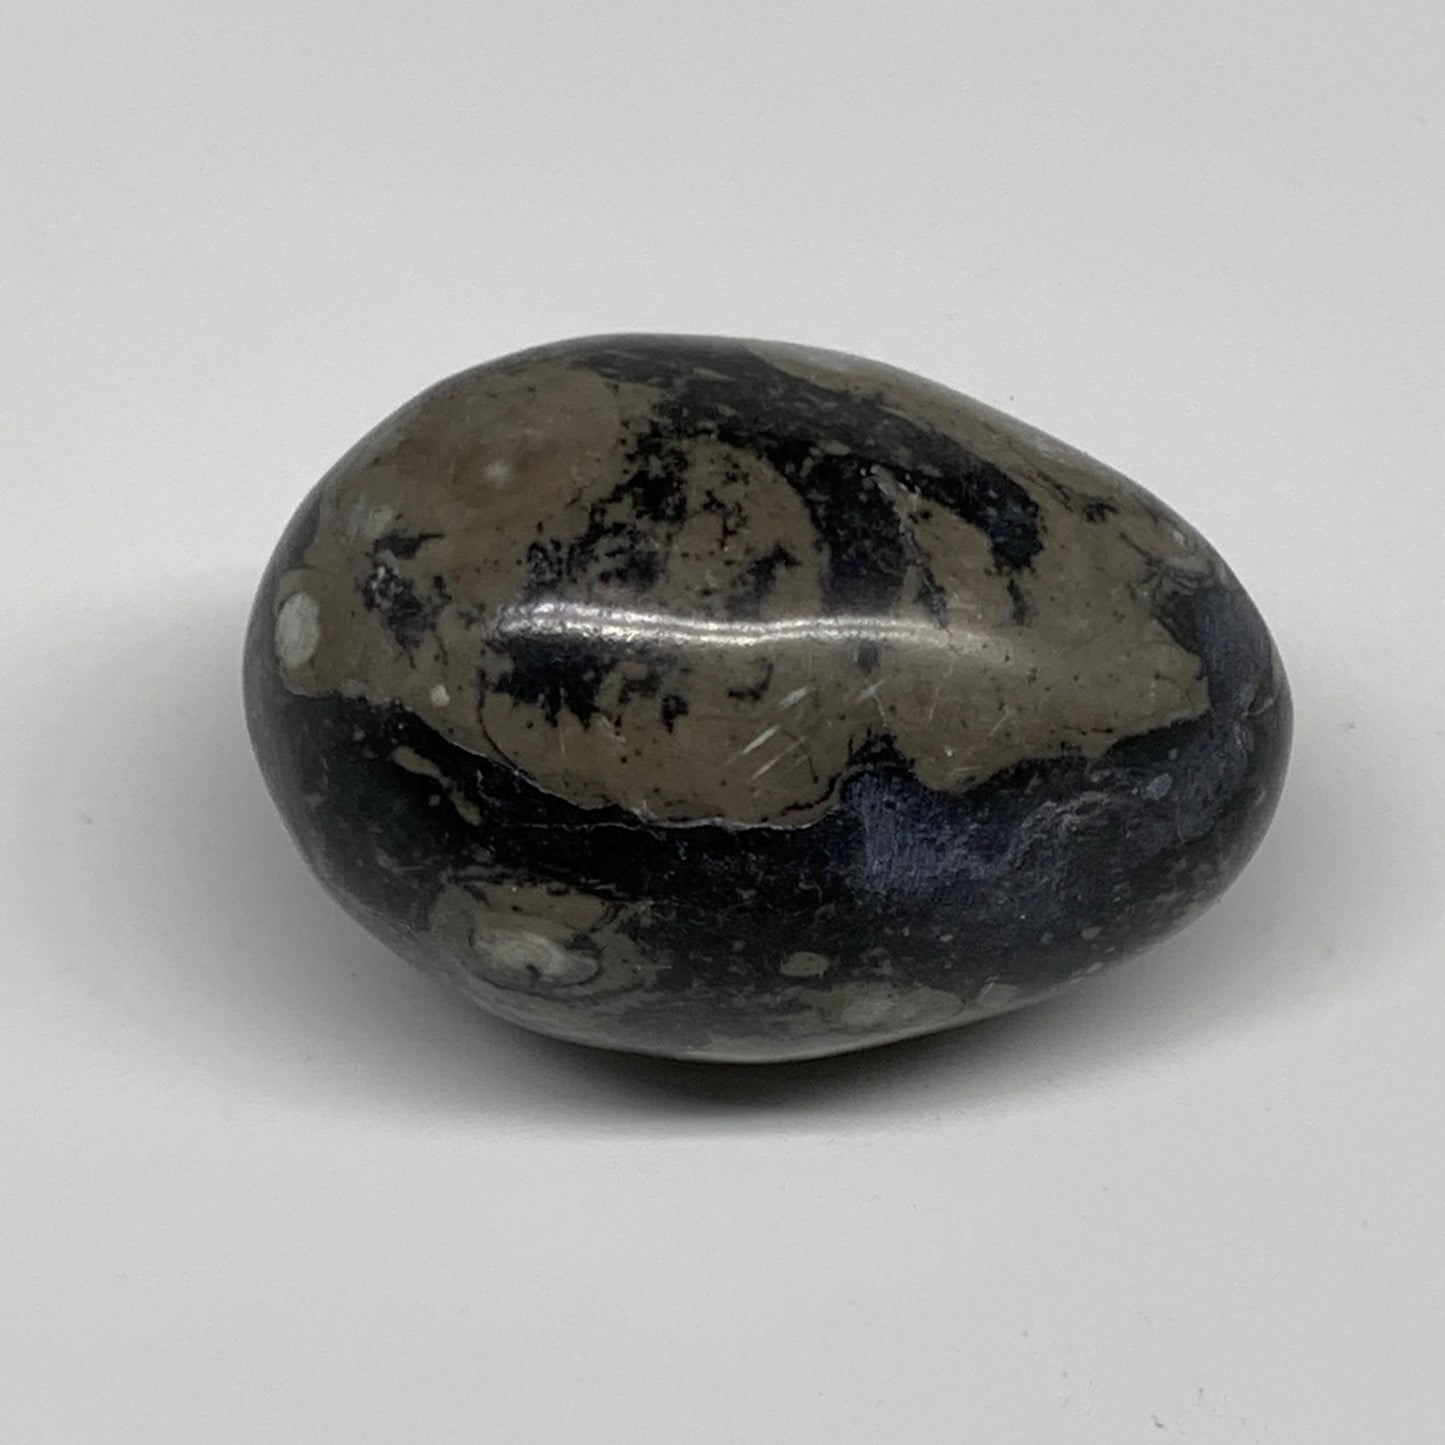 167.1g, 2.4"x1.7", Natural Fossil Orthoceras Stone Egg from Morocco, B31053